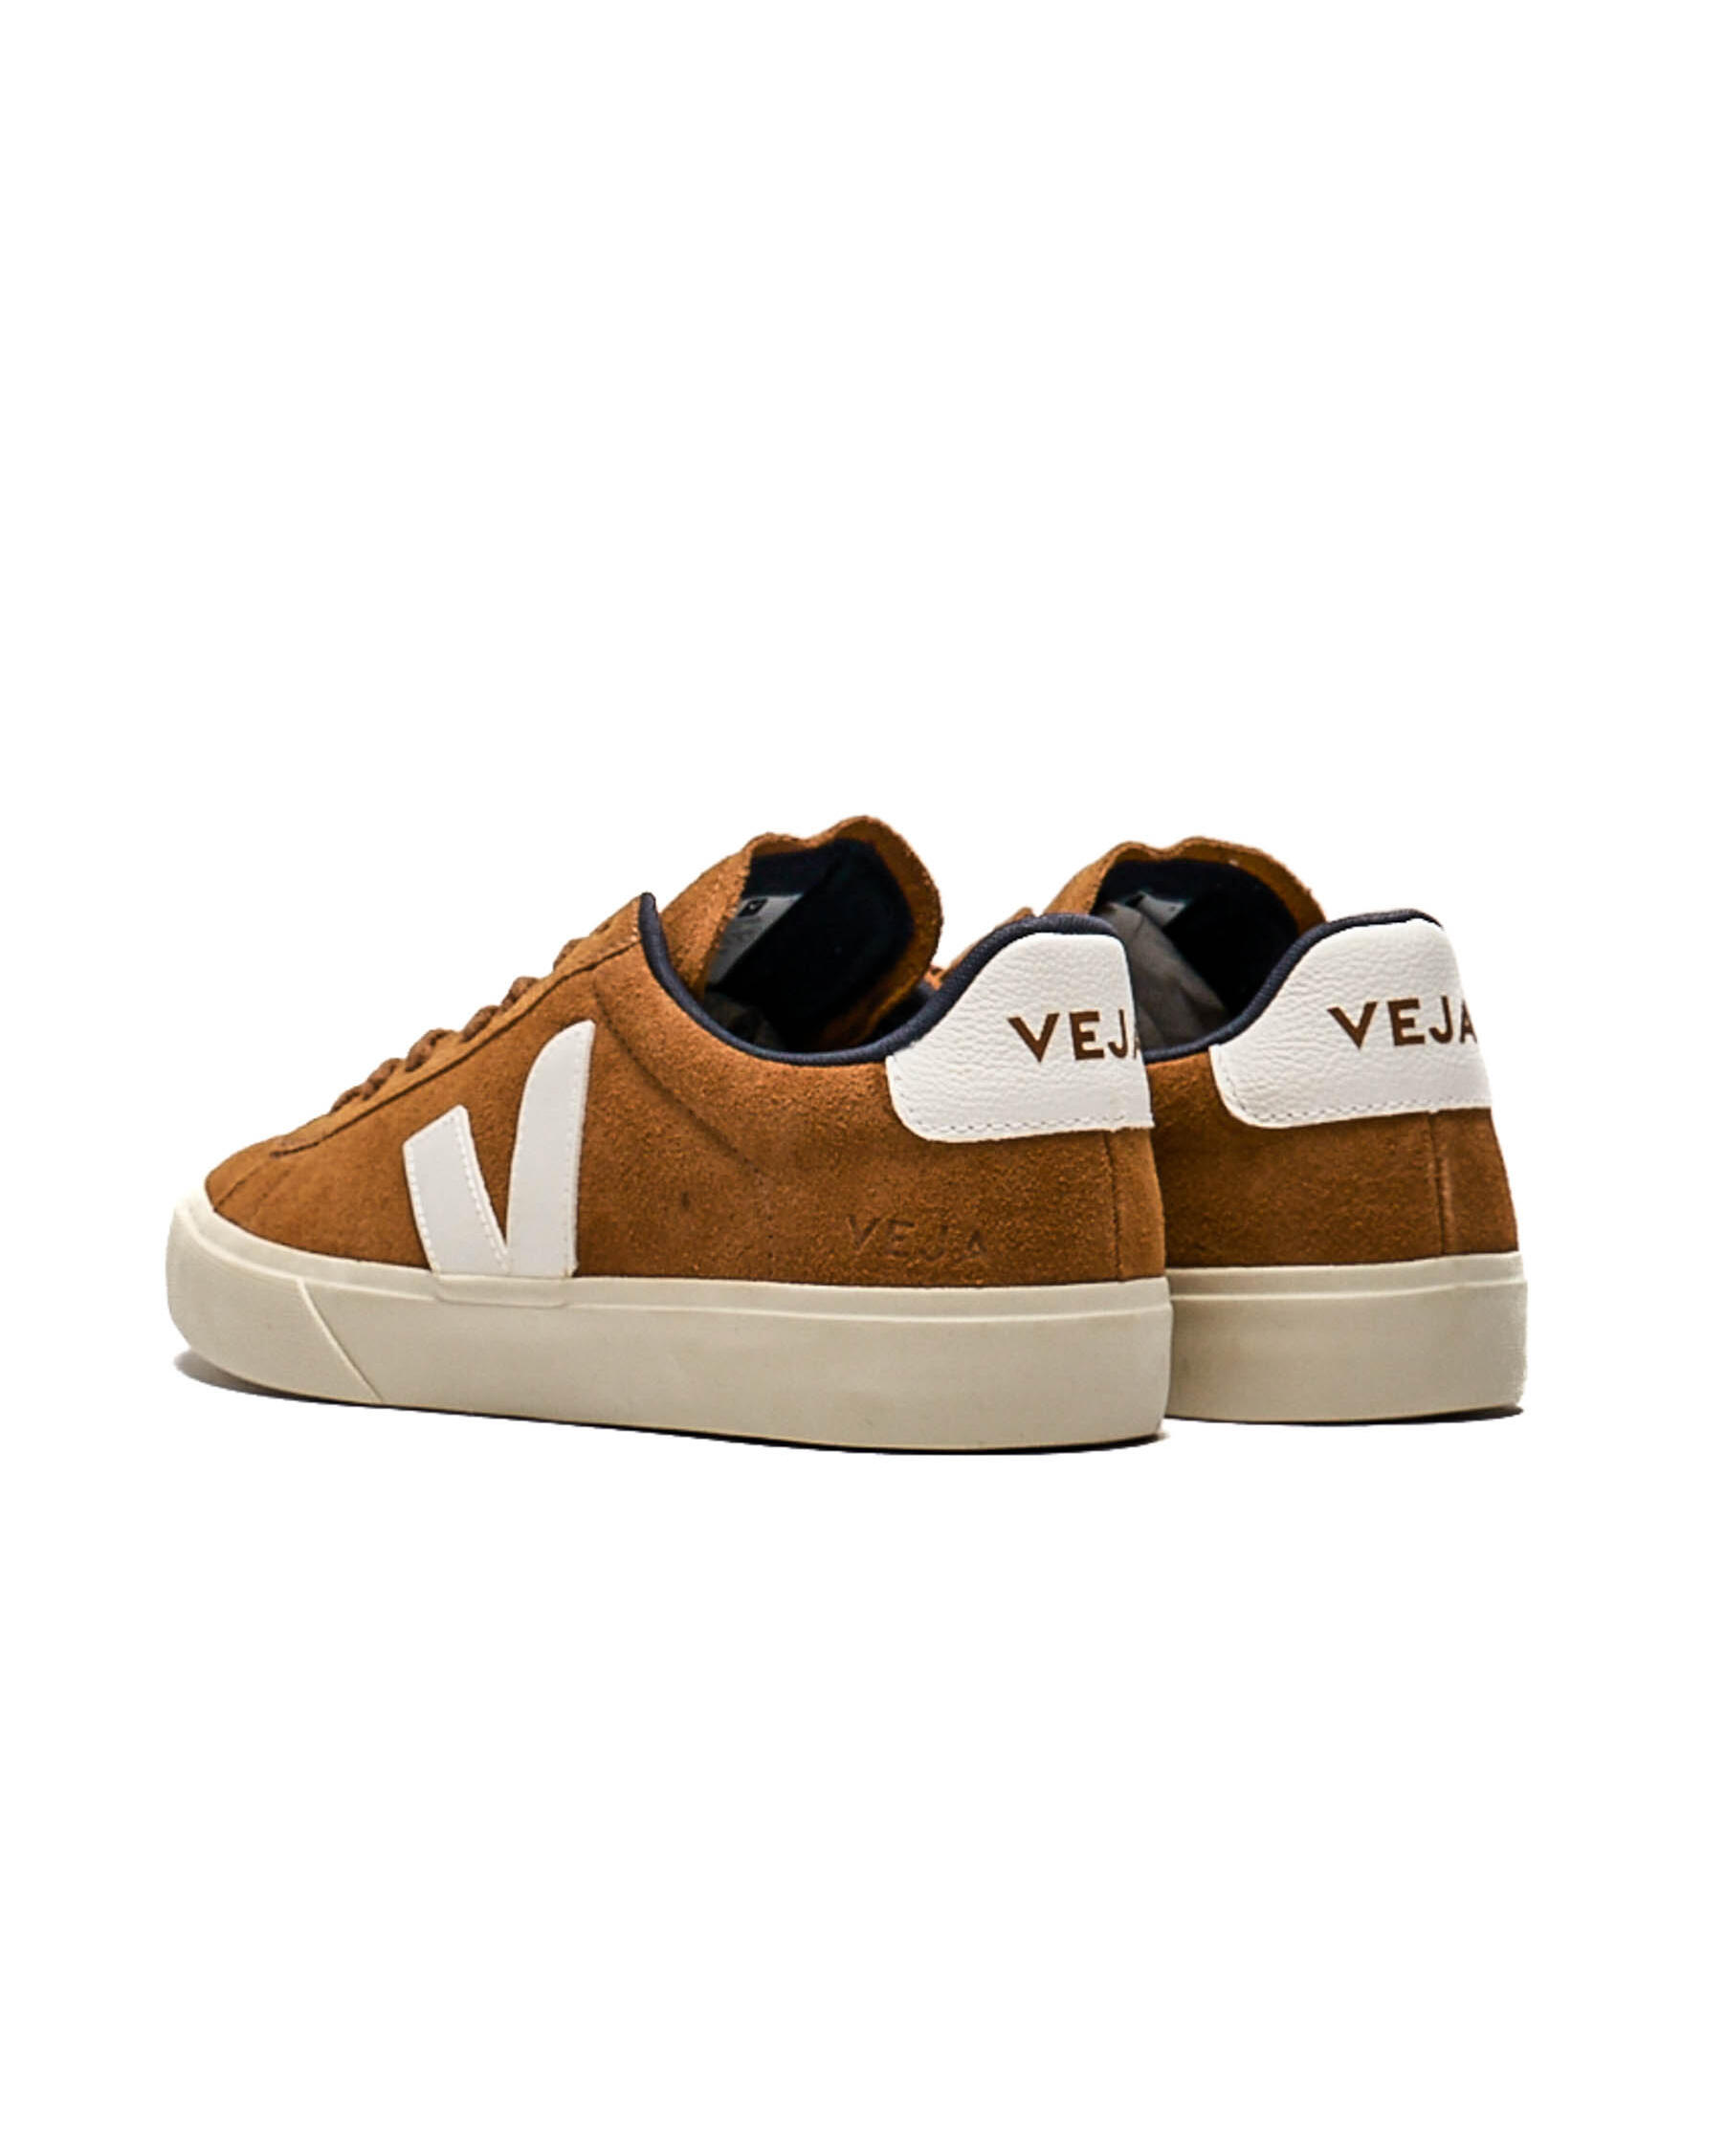 Veja Campo | CP0303160B | AFEW STORE